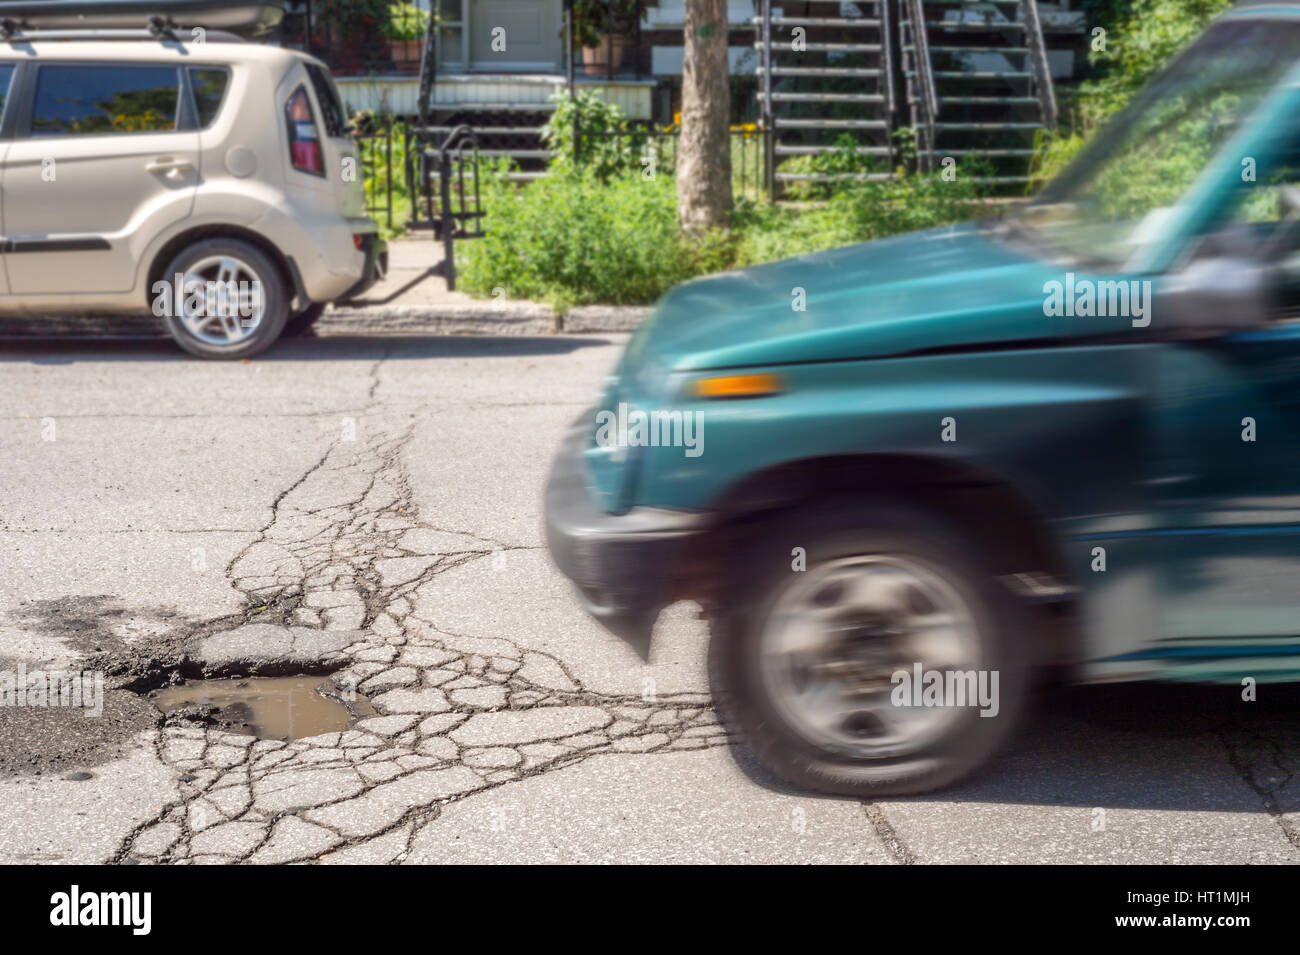 Large deep pothole with car approaching in Montreal street, Canada. Stock Photo